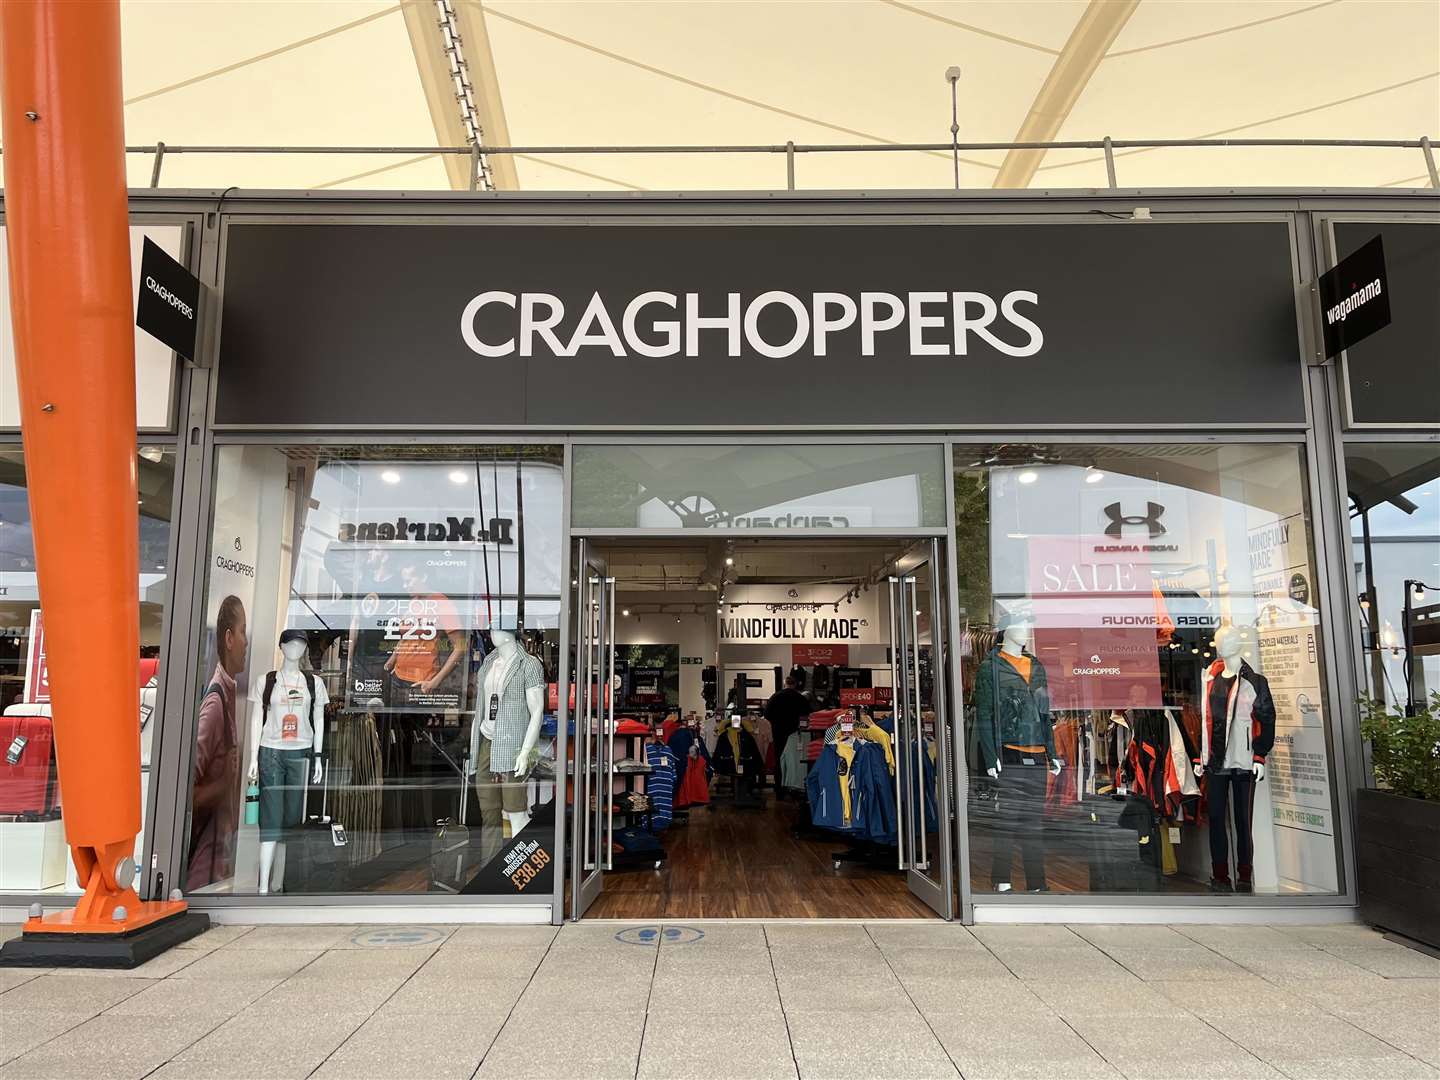 Craghoppers is a new store that has just opened at Ashford Designer Outlet